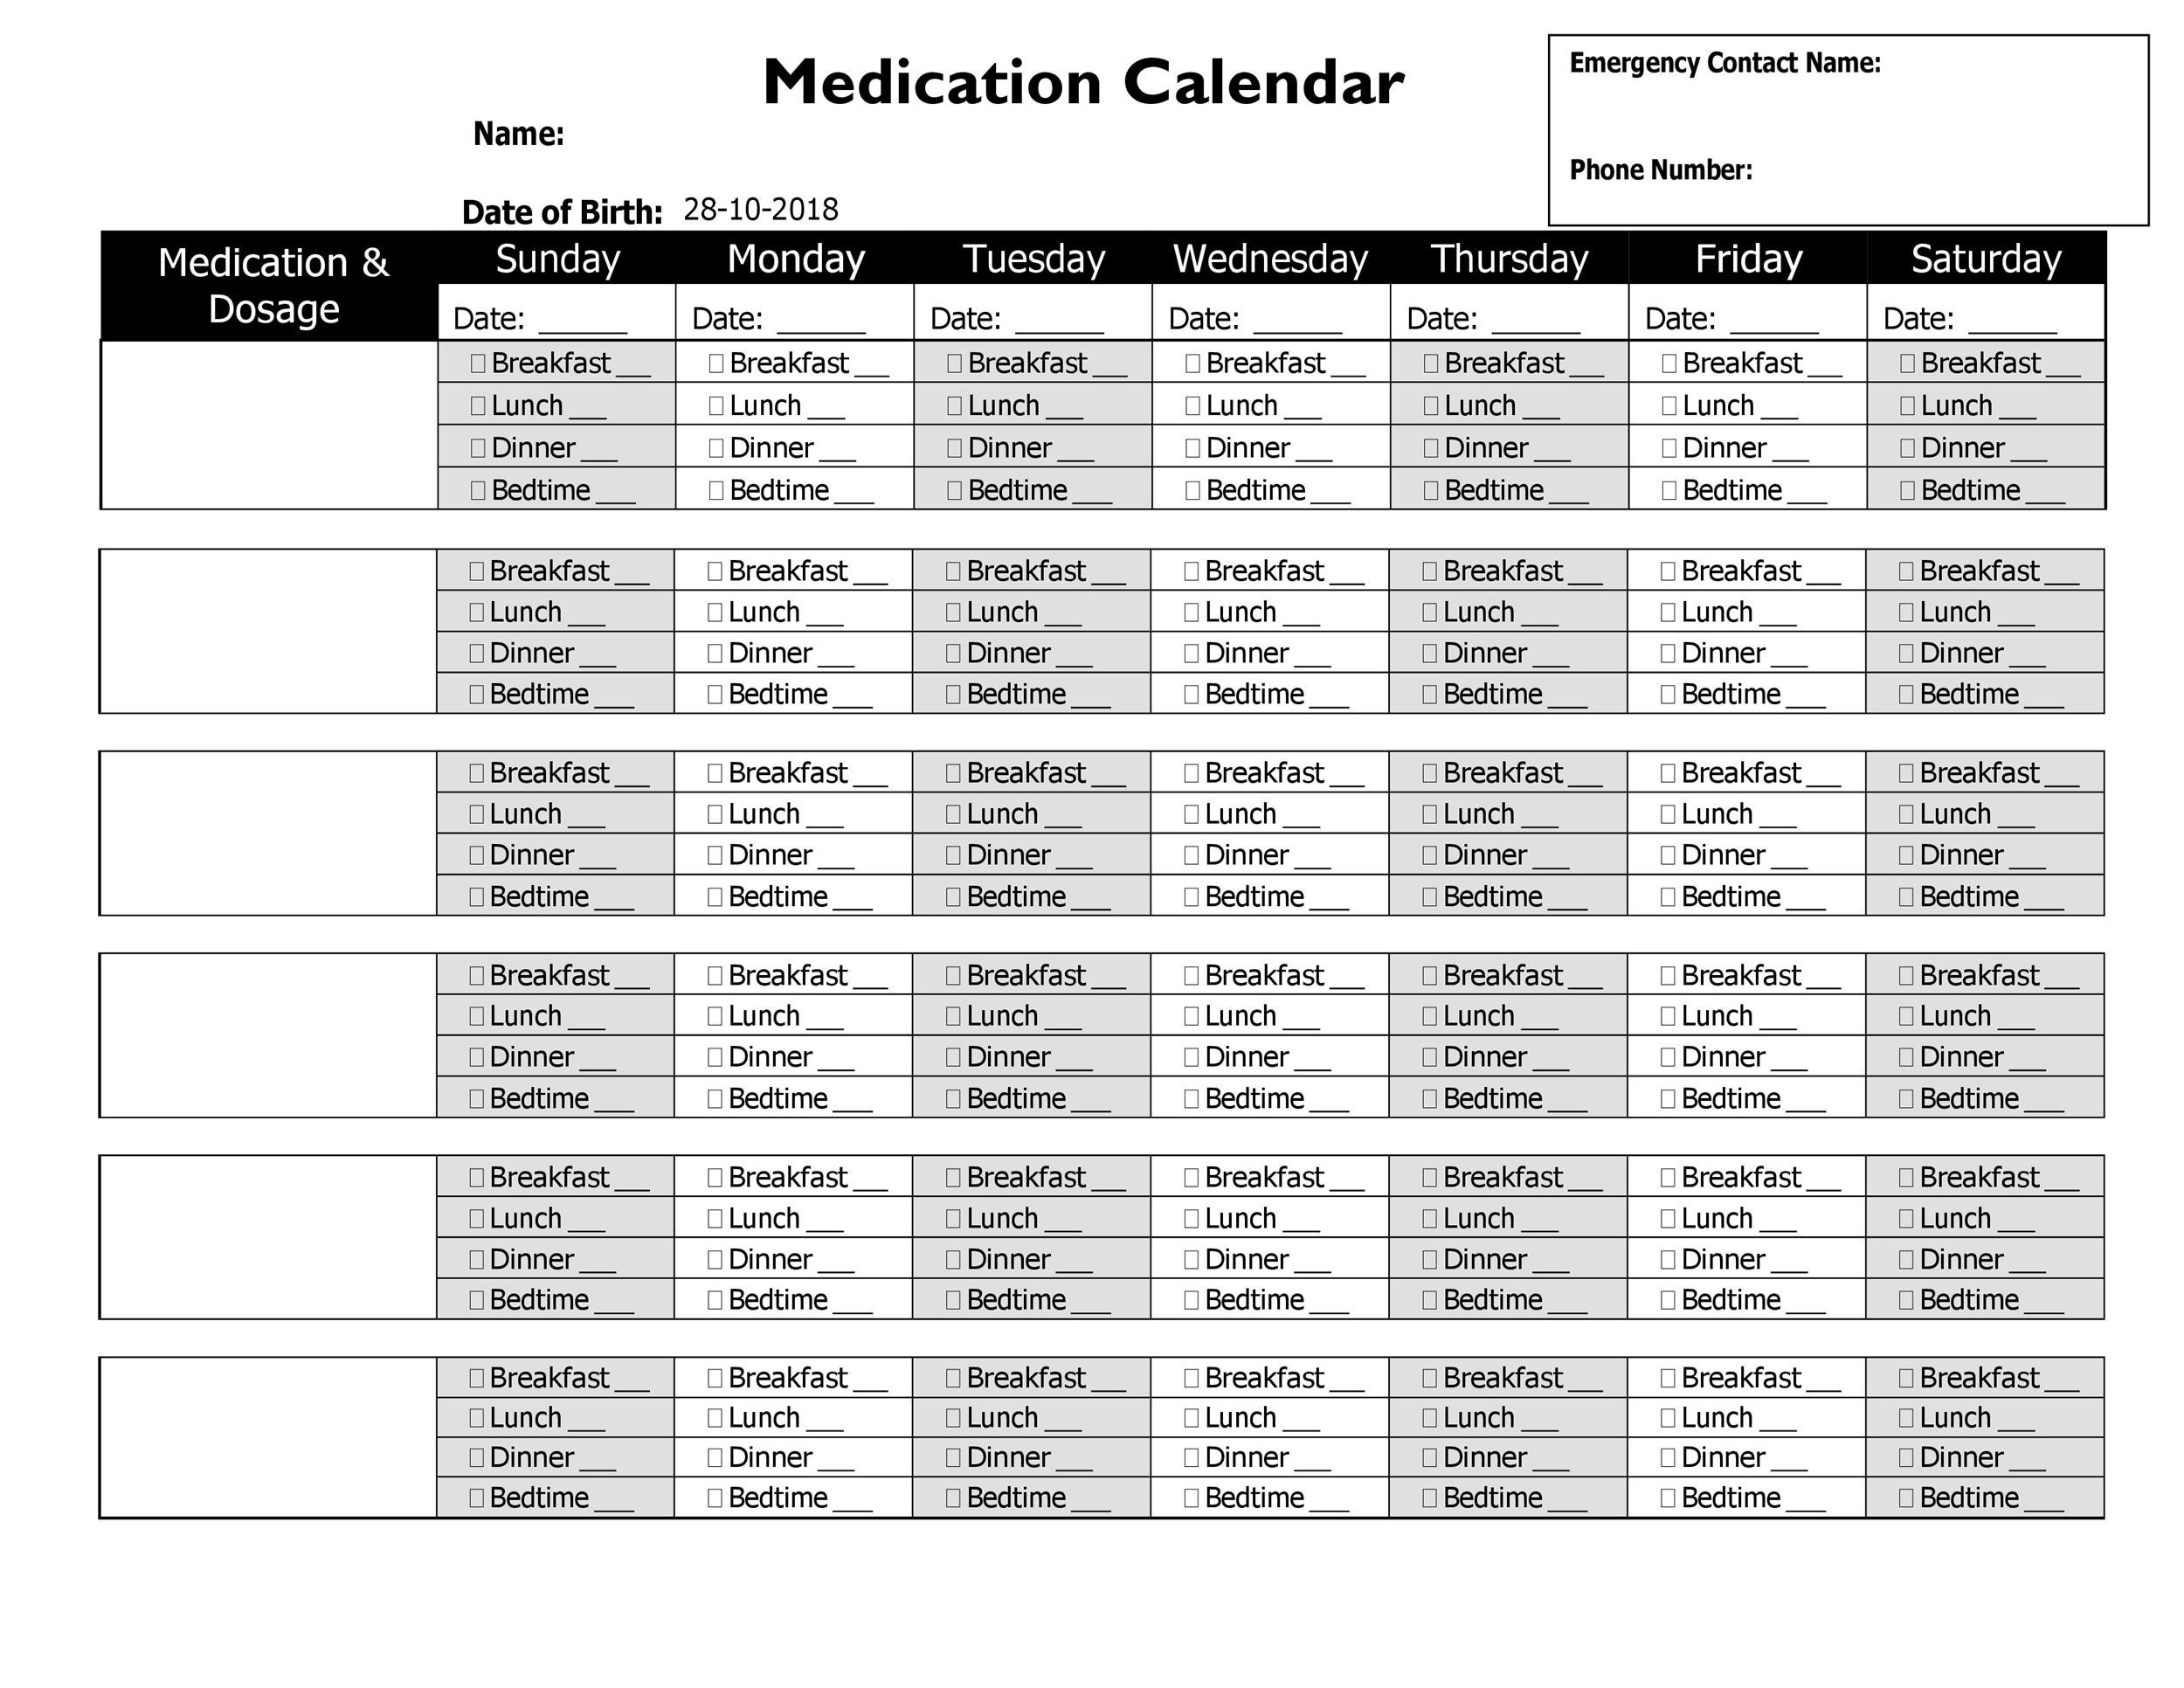 Free medication schedule template 06